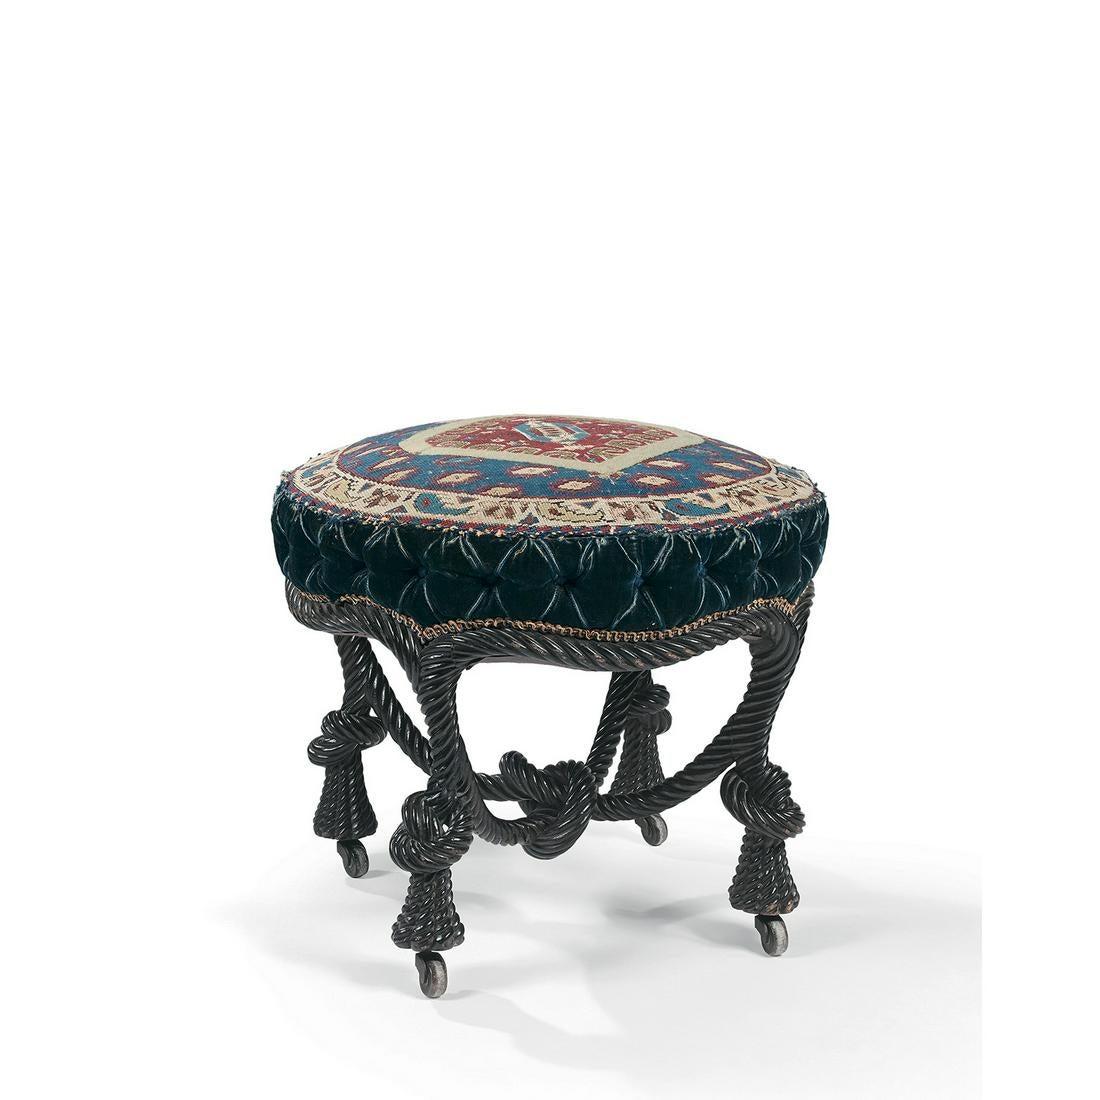 Blackened French Napoléon III Carved Rope Stool Attributed to A.M.E Fournier, circa 1875